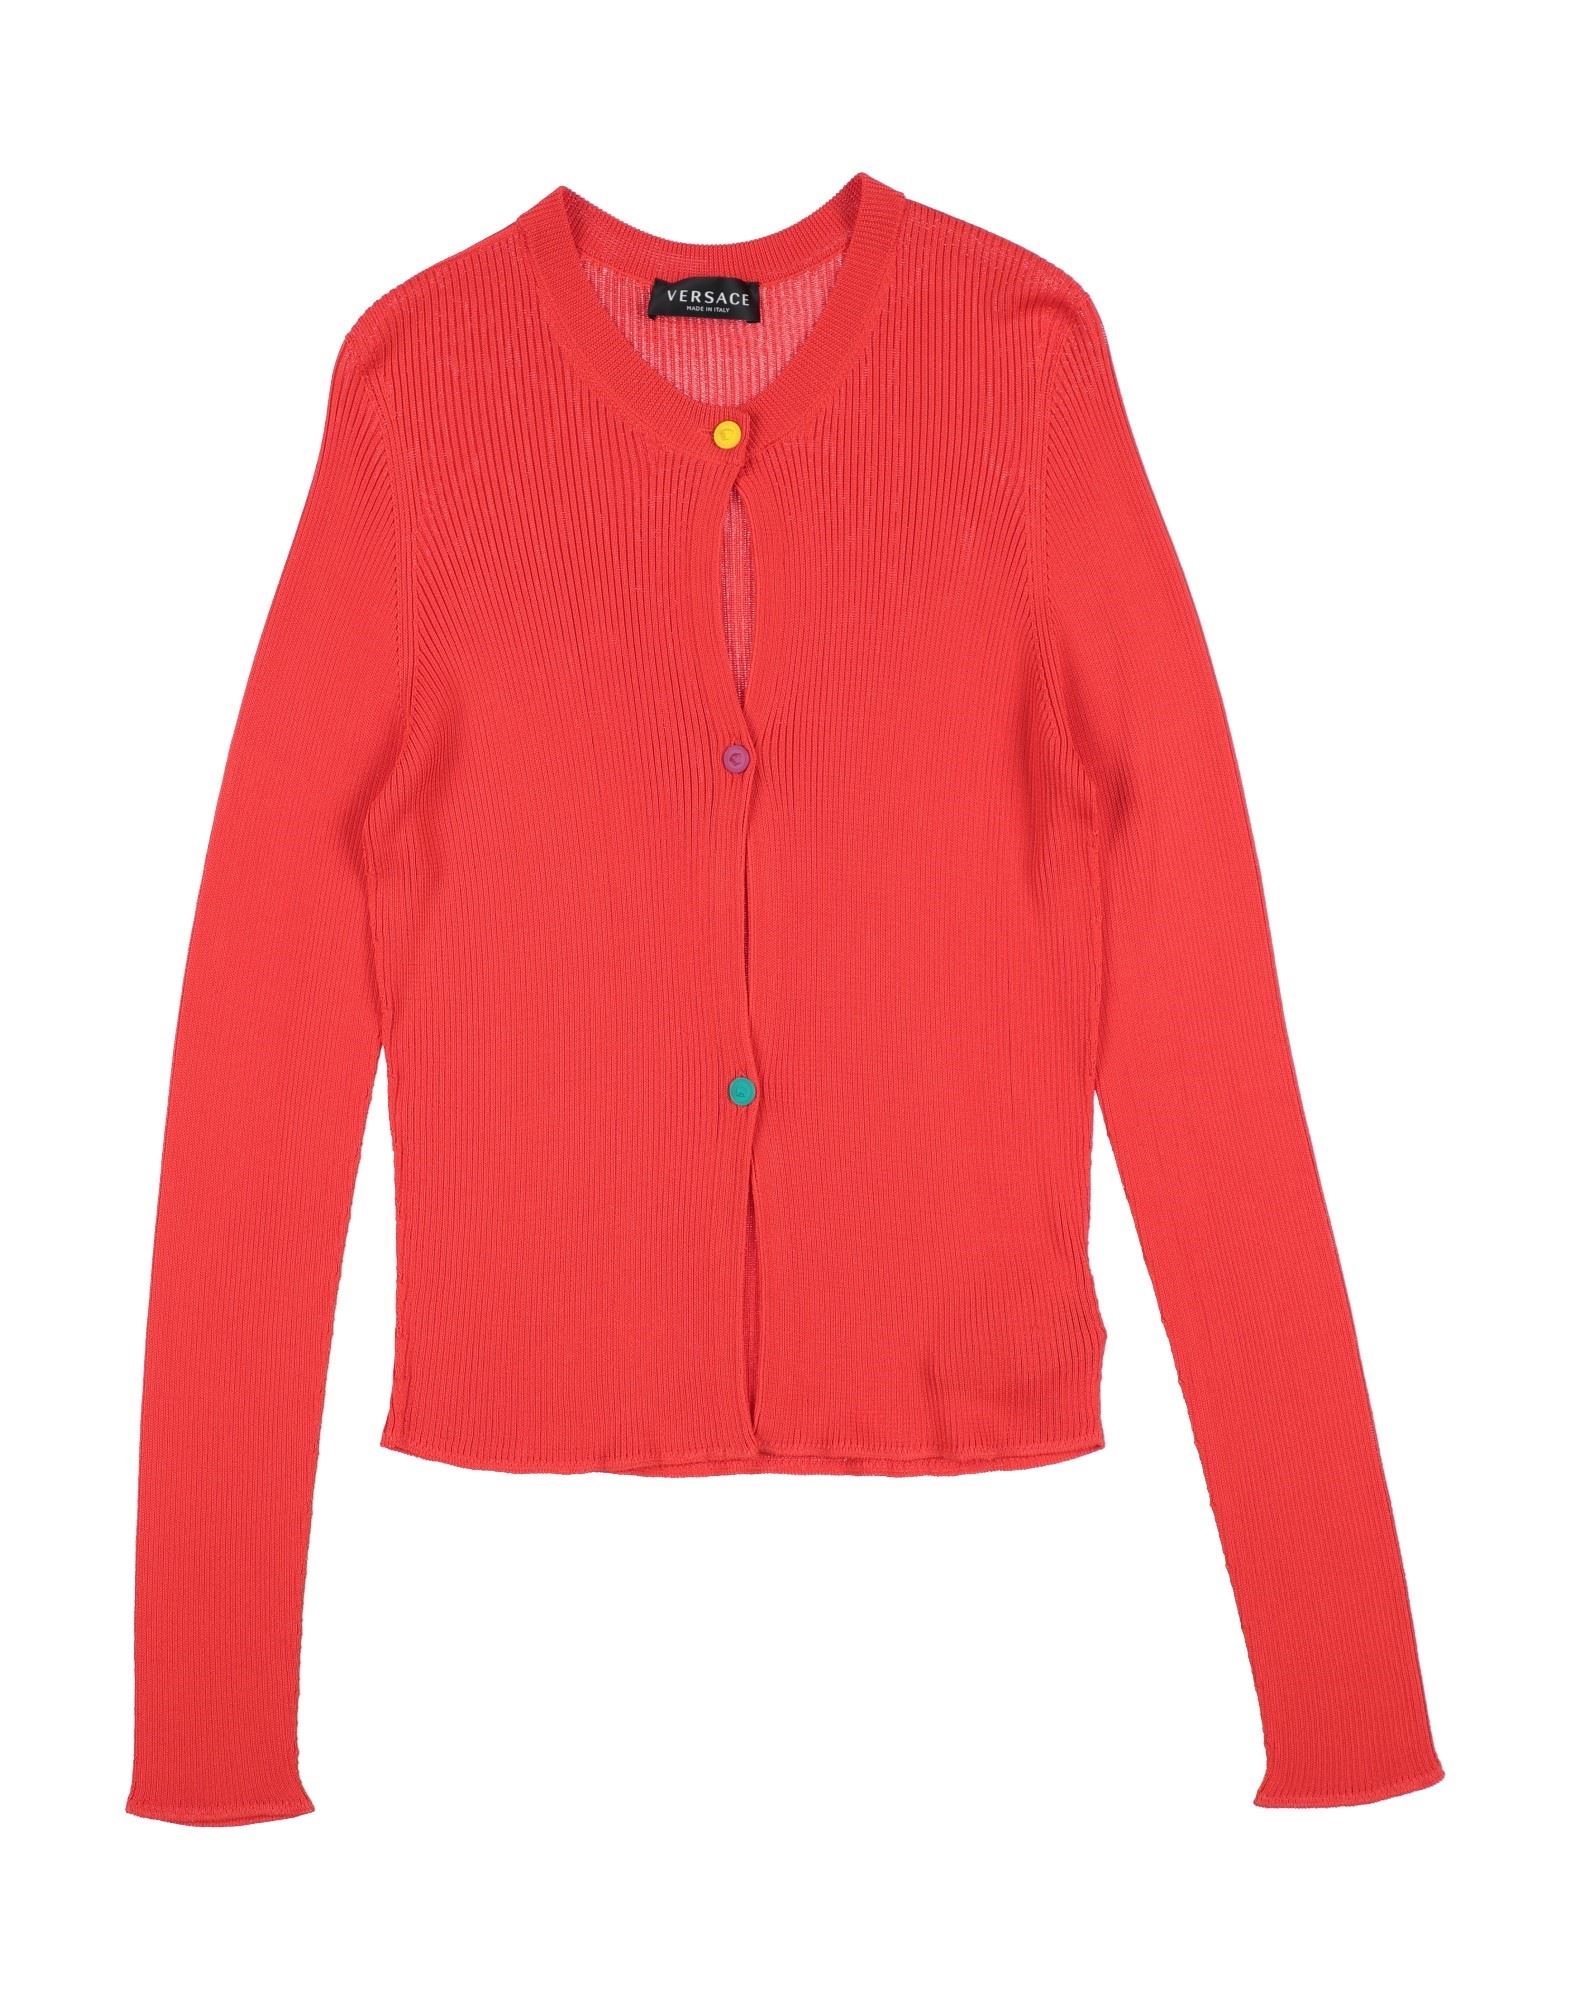 VERSACE YOUNG Strickjacke Kinder Rot von VERSACE YOUNG